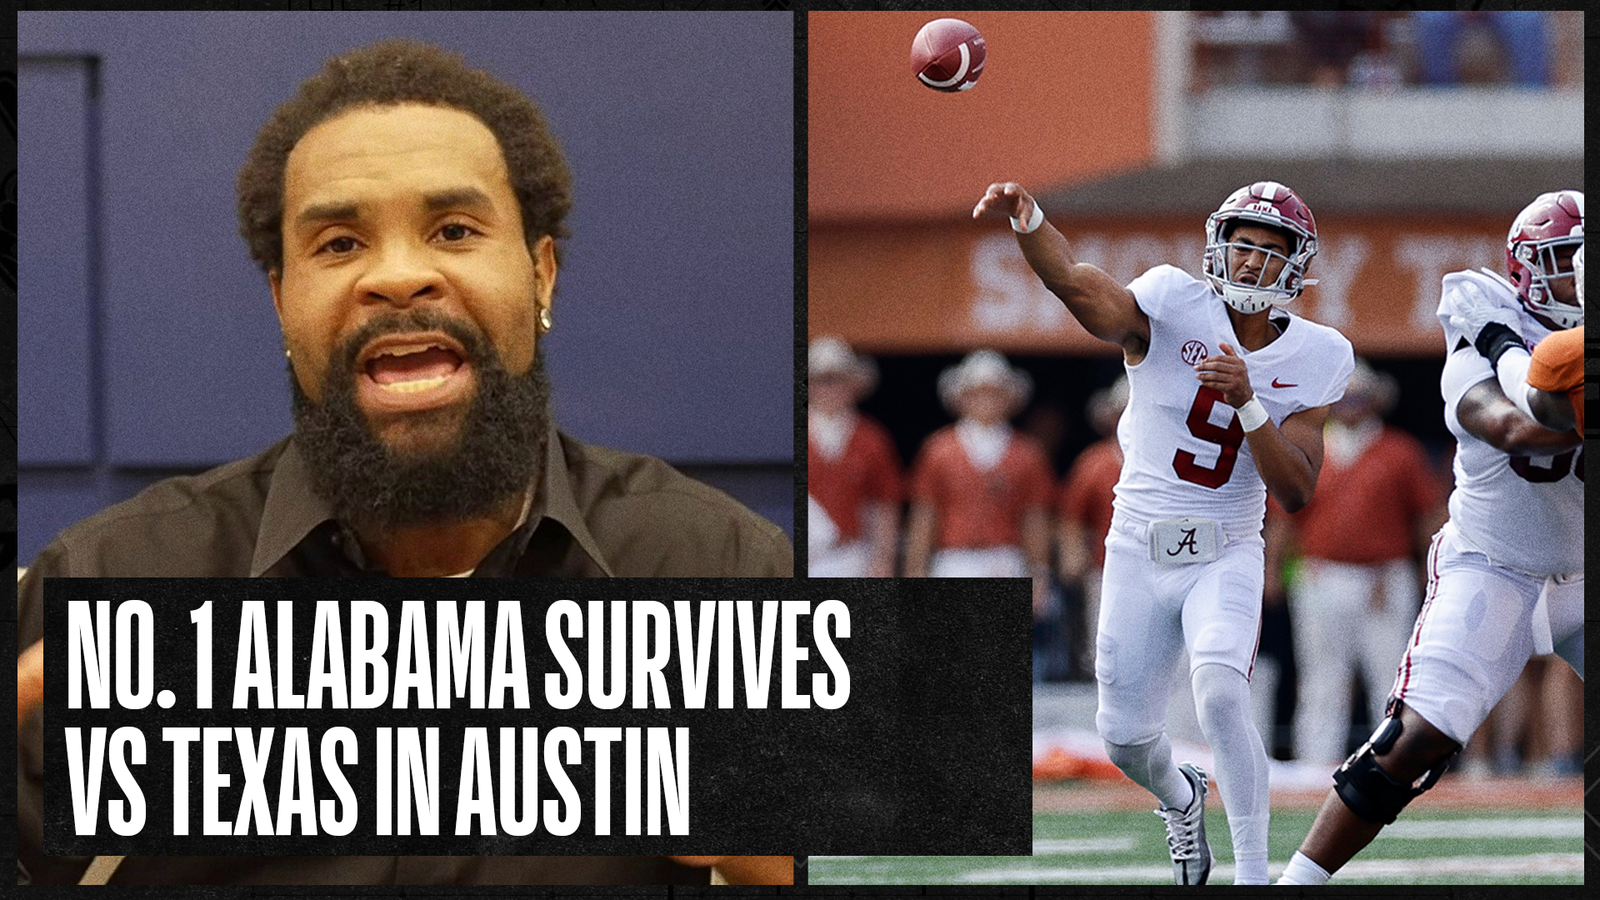 RJ Young on why No. 1 Alabama might be overrated and Texas might be underrated